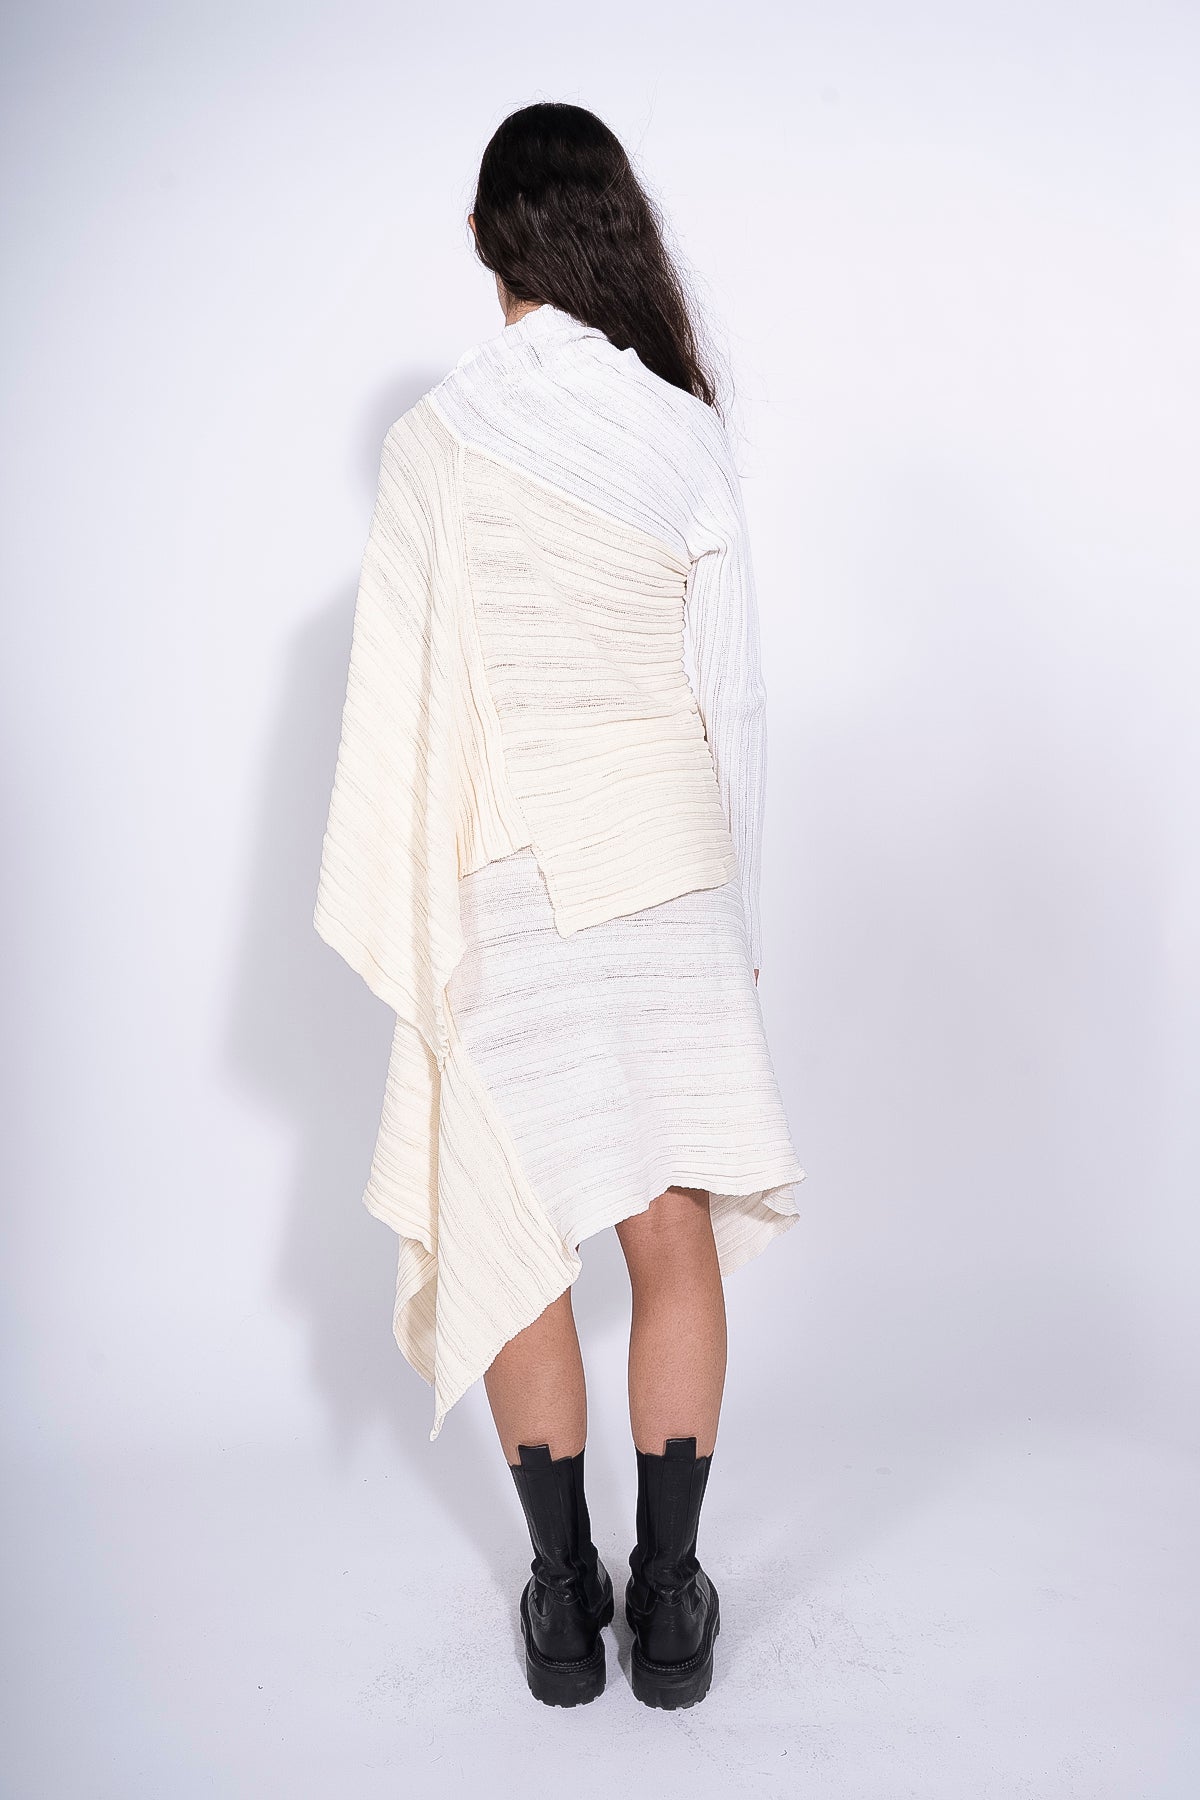 WHITE PATCHWORK DRAPED JUMPER IN COTTON LIGHT KNIT marques almeida